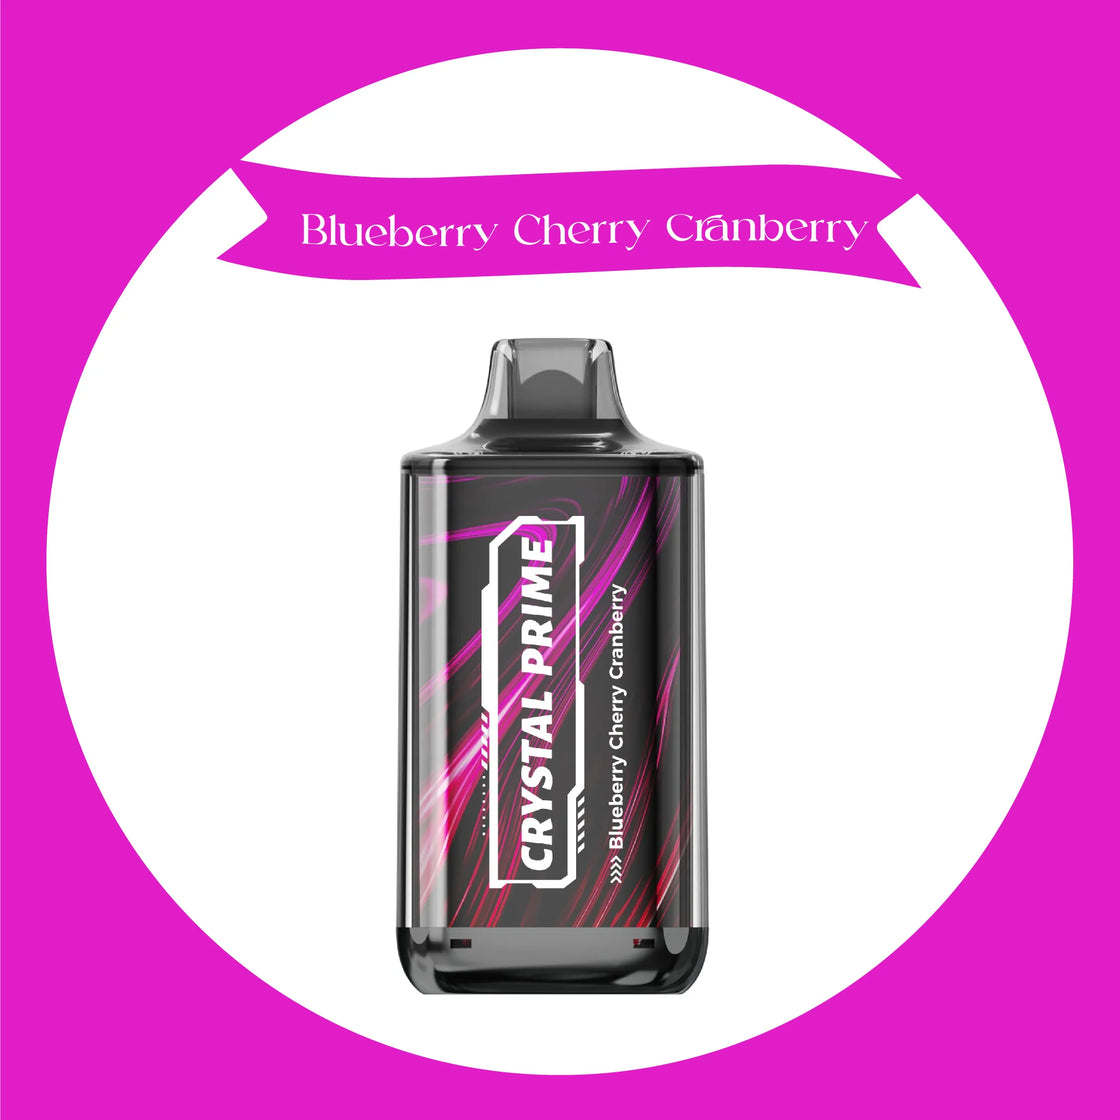 crystal-prime-deluxe-18000-puffs-uk-blueberry-cherry-cranberry